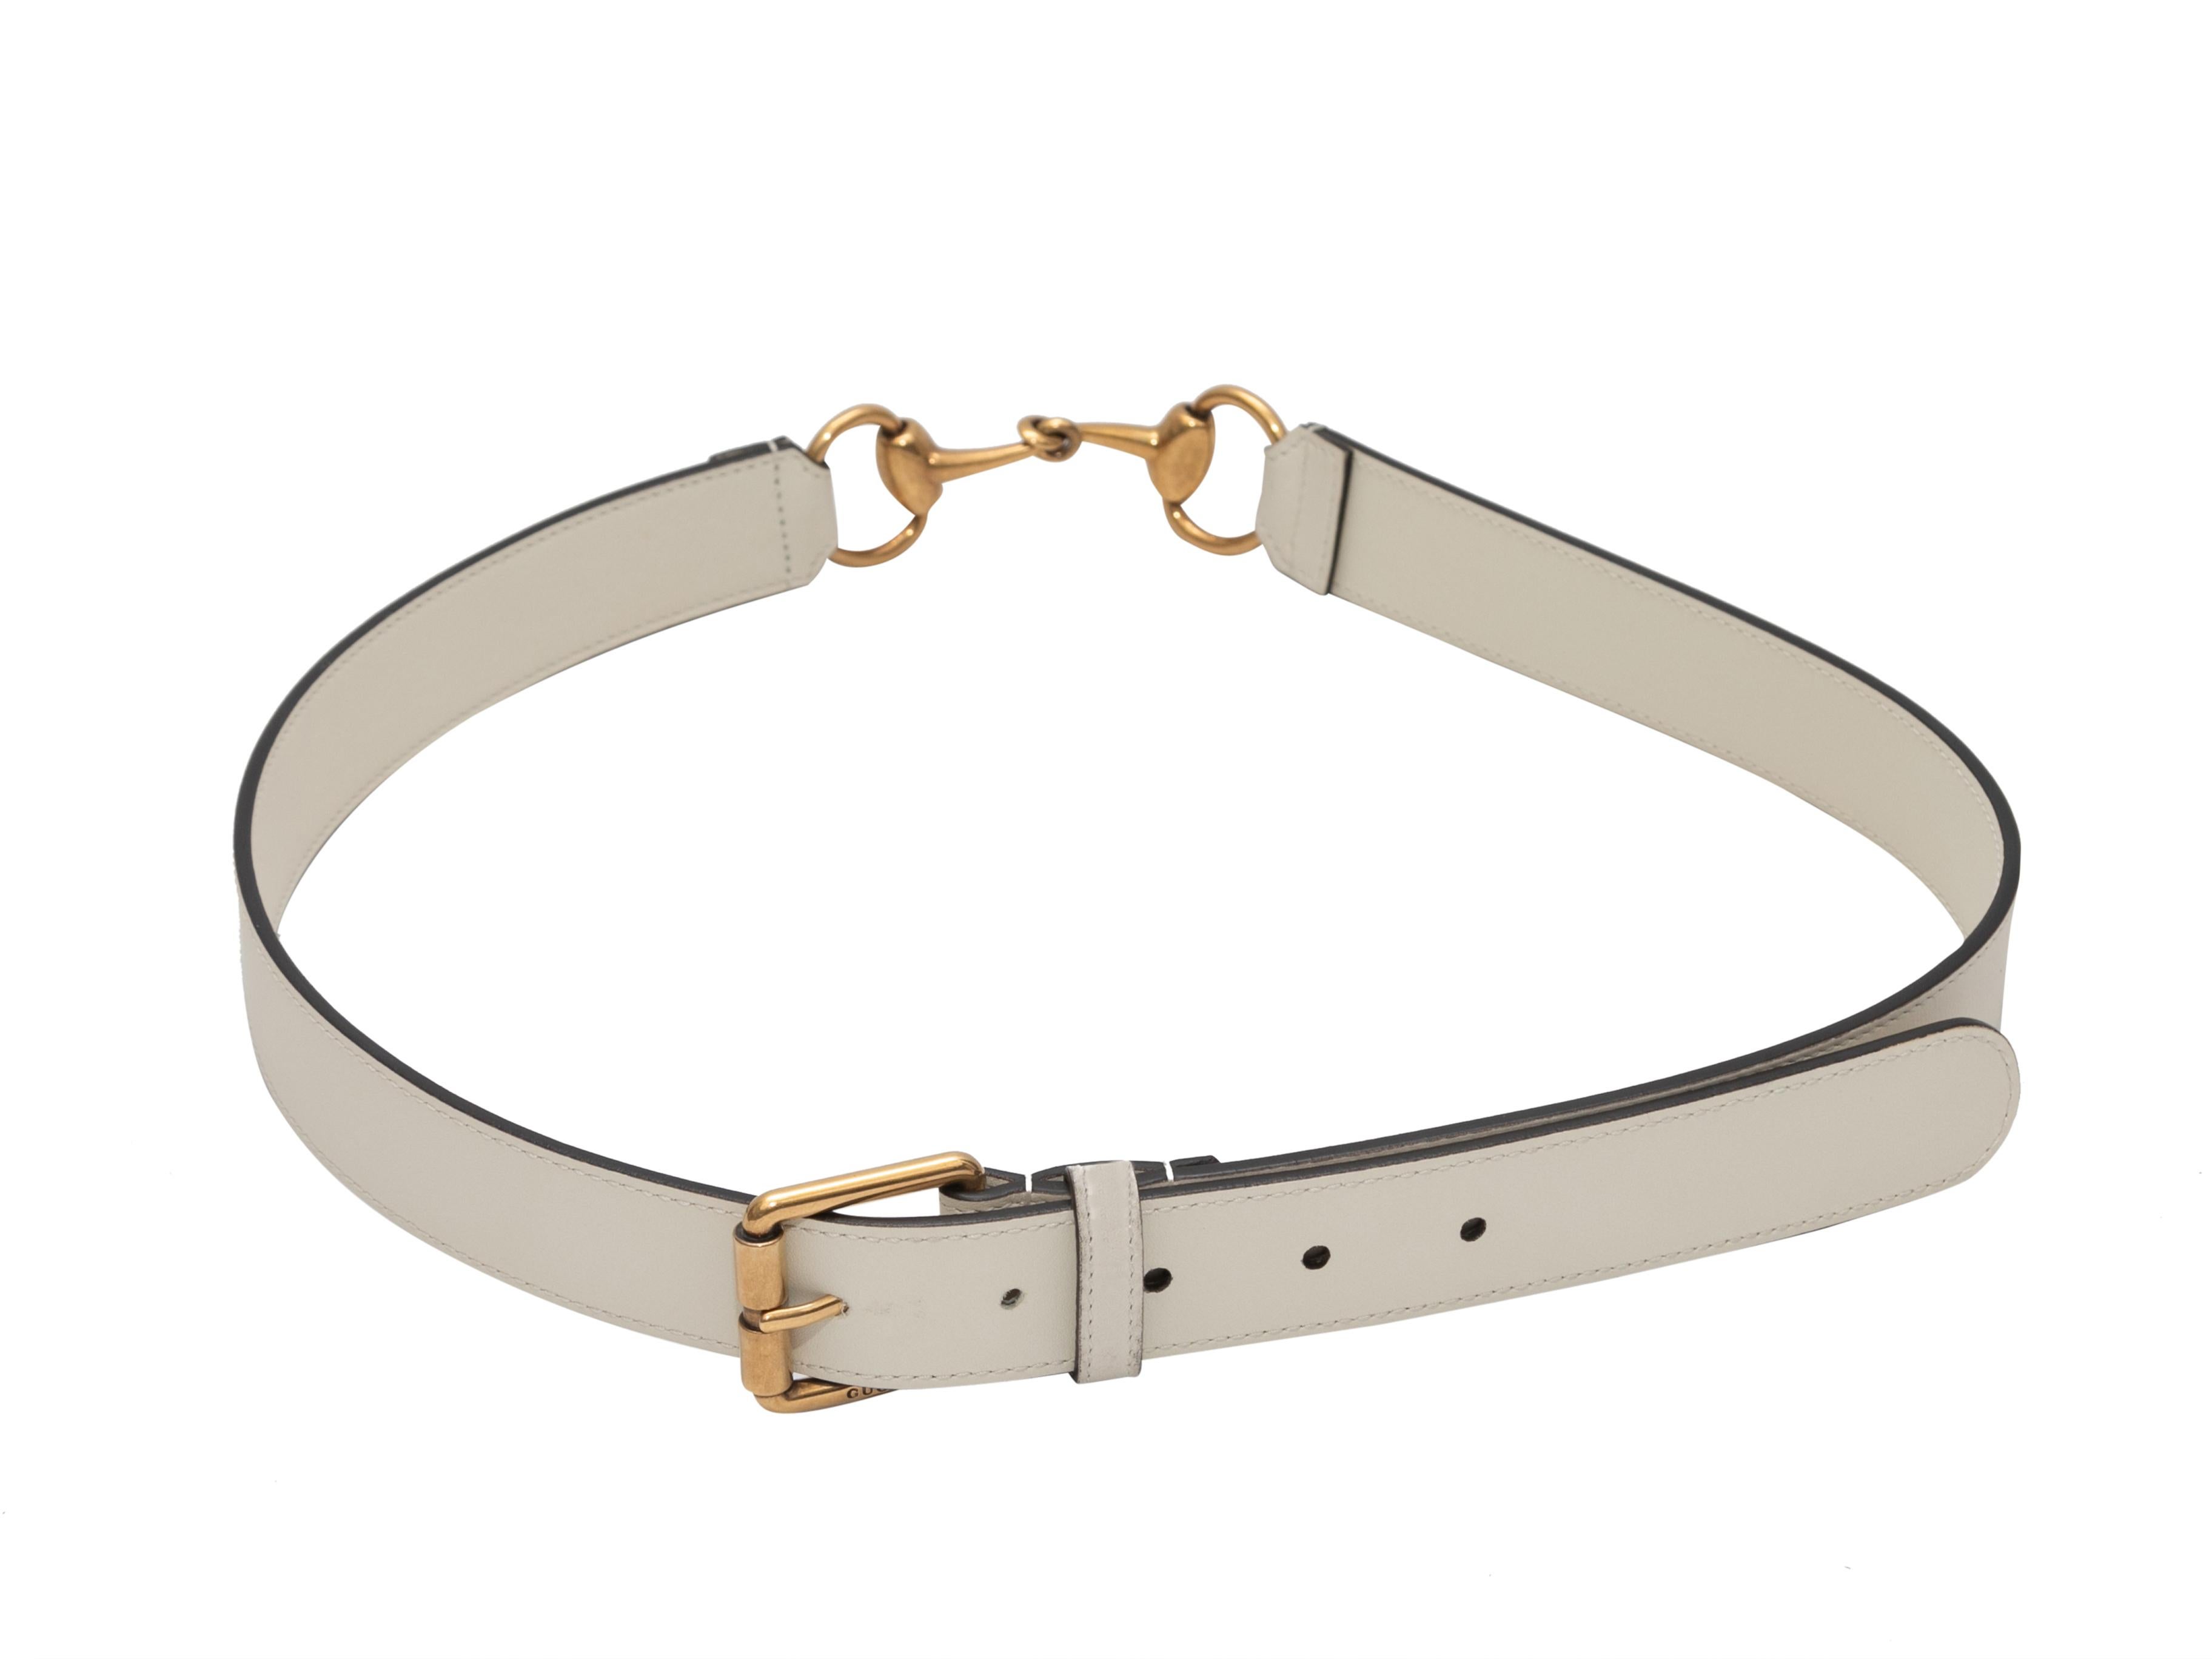 White leather belt by Gucci. Gold-tone hardware. Horsebit accent at back. Front buckle closure. 1